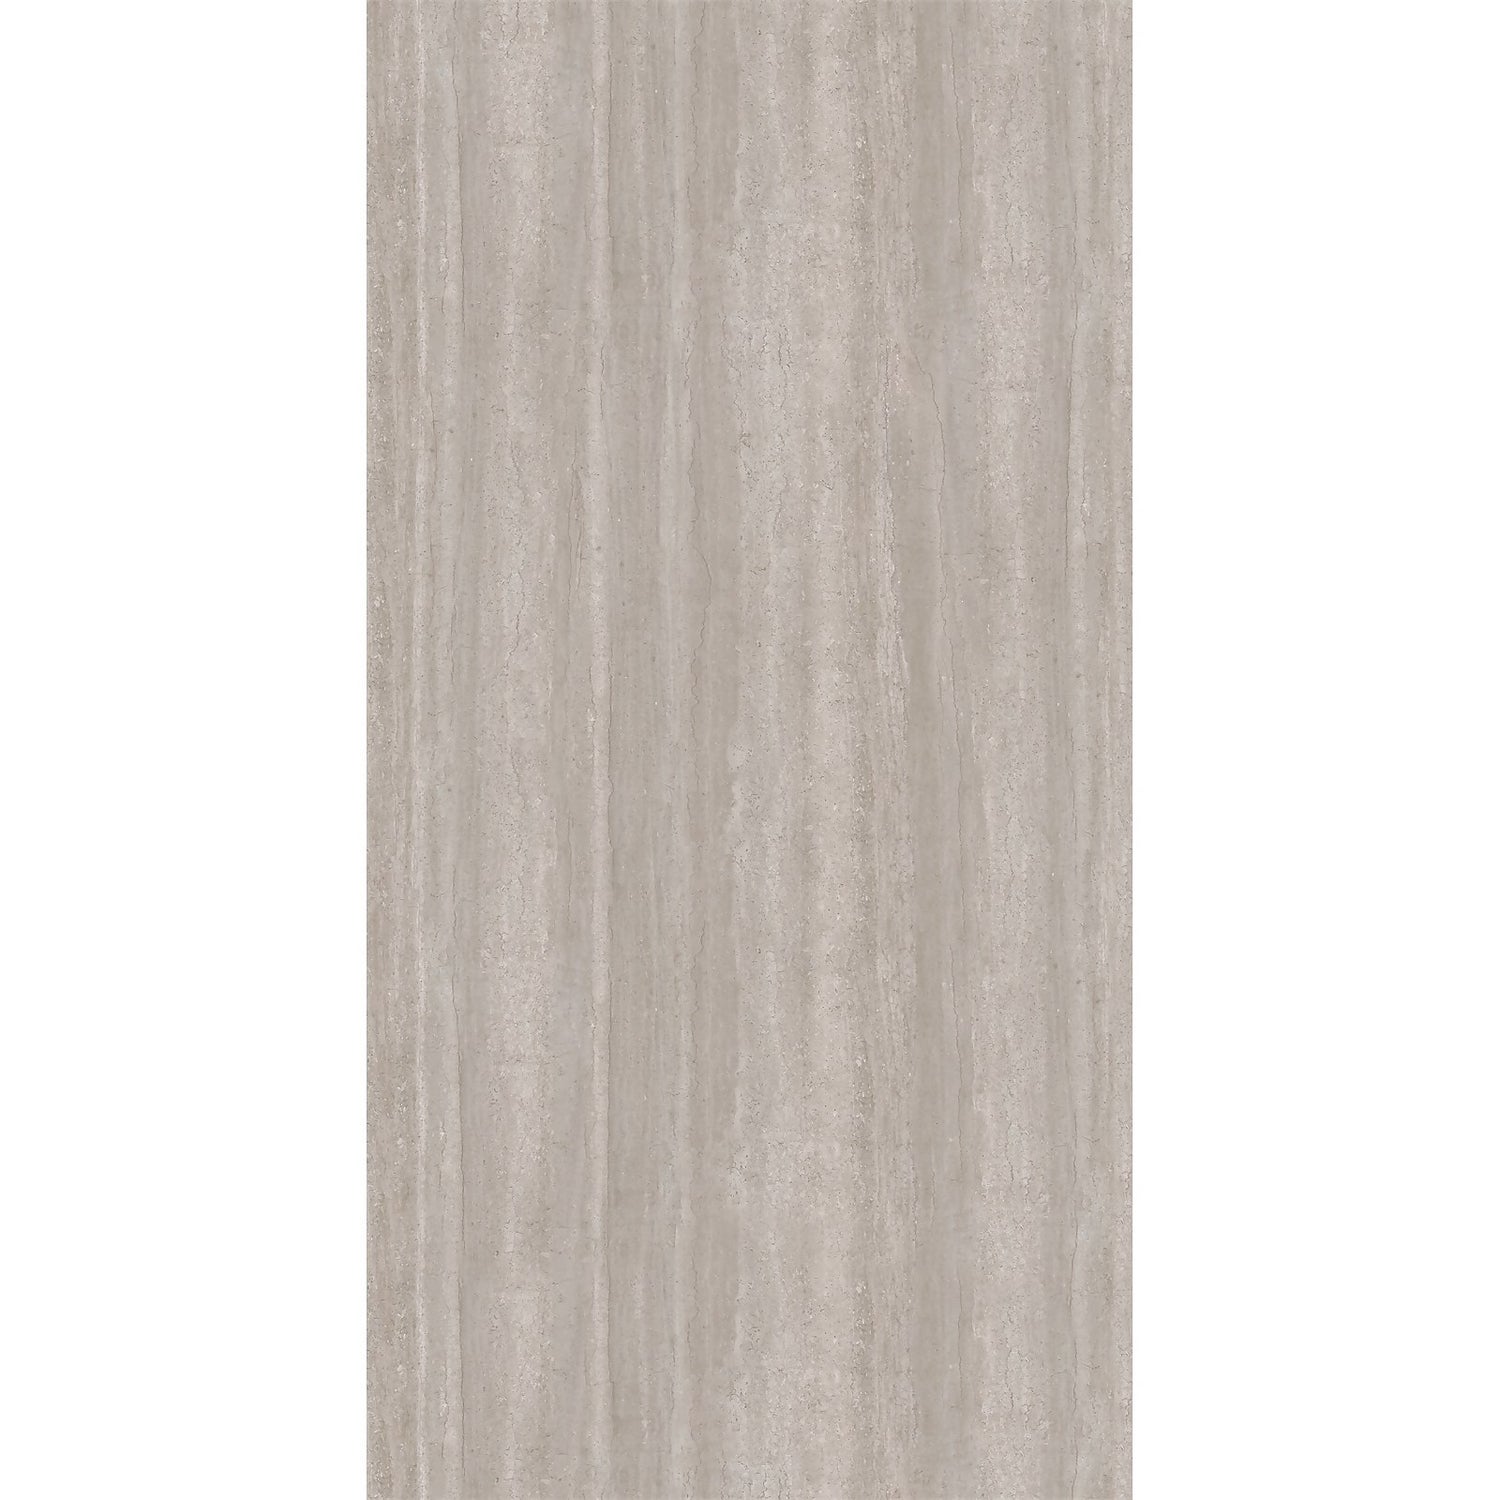 Wetwall Elite Tongue & Grooved Shower Wall Panel Vieste 2420mm x 600mm x 10mm